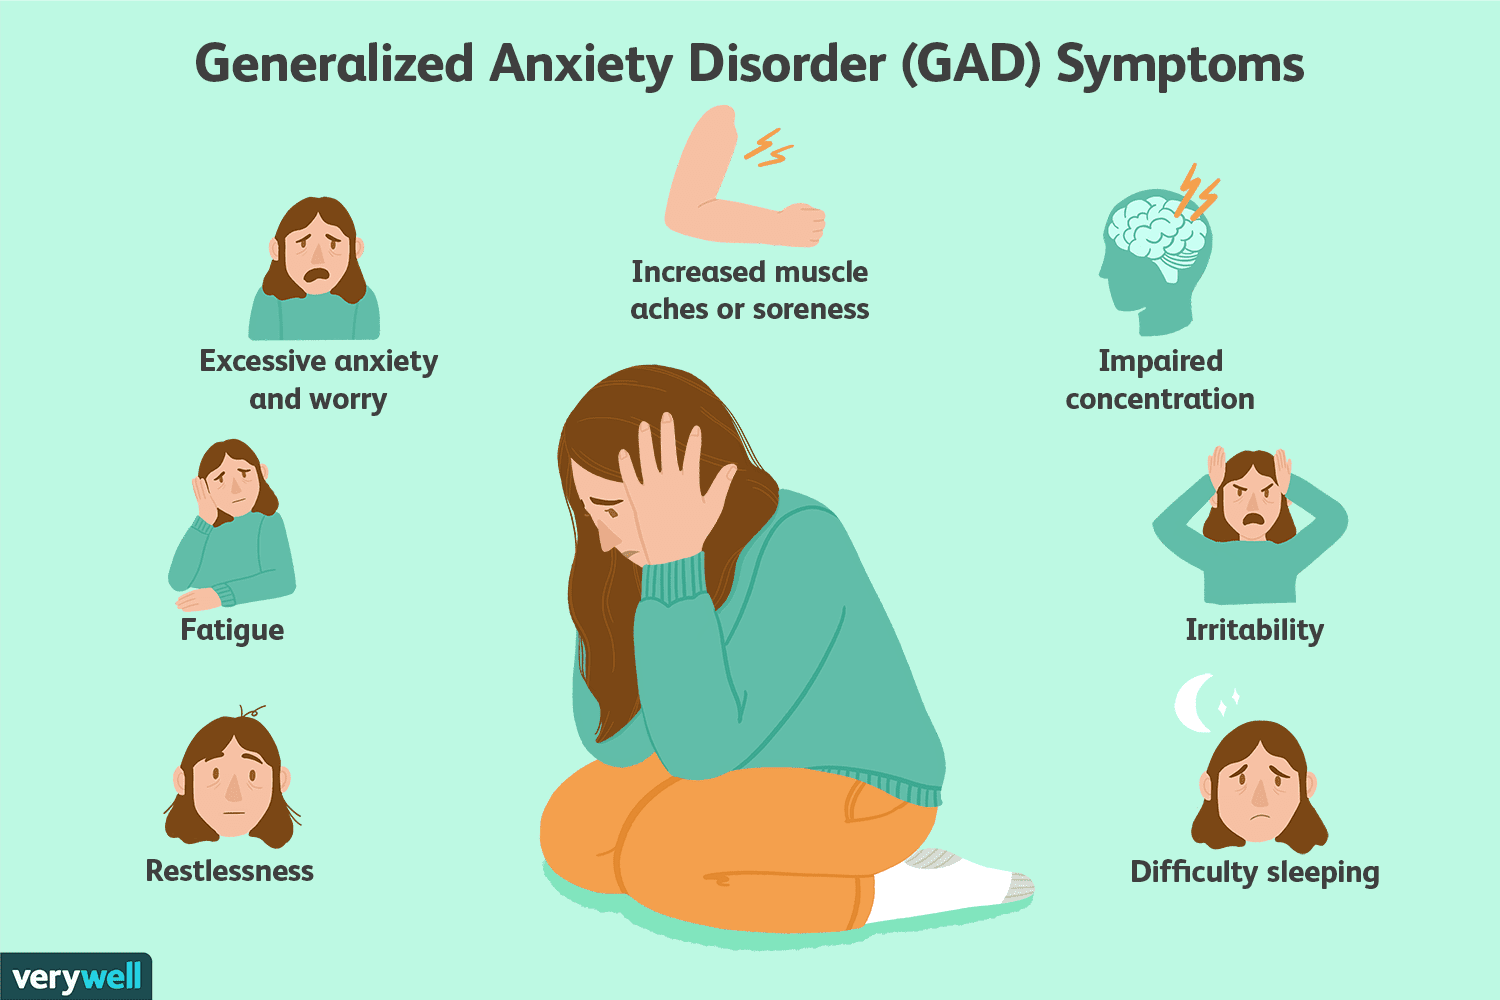 dsm-5-criteria-for-generalized-anxiety-disorder-1393147_v2-902be69757414cc7a517ef3ca9838b59